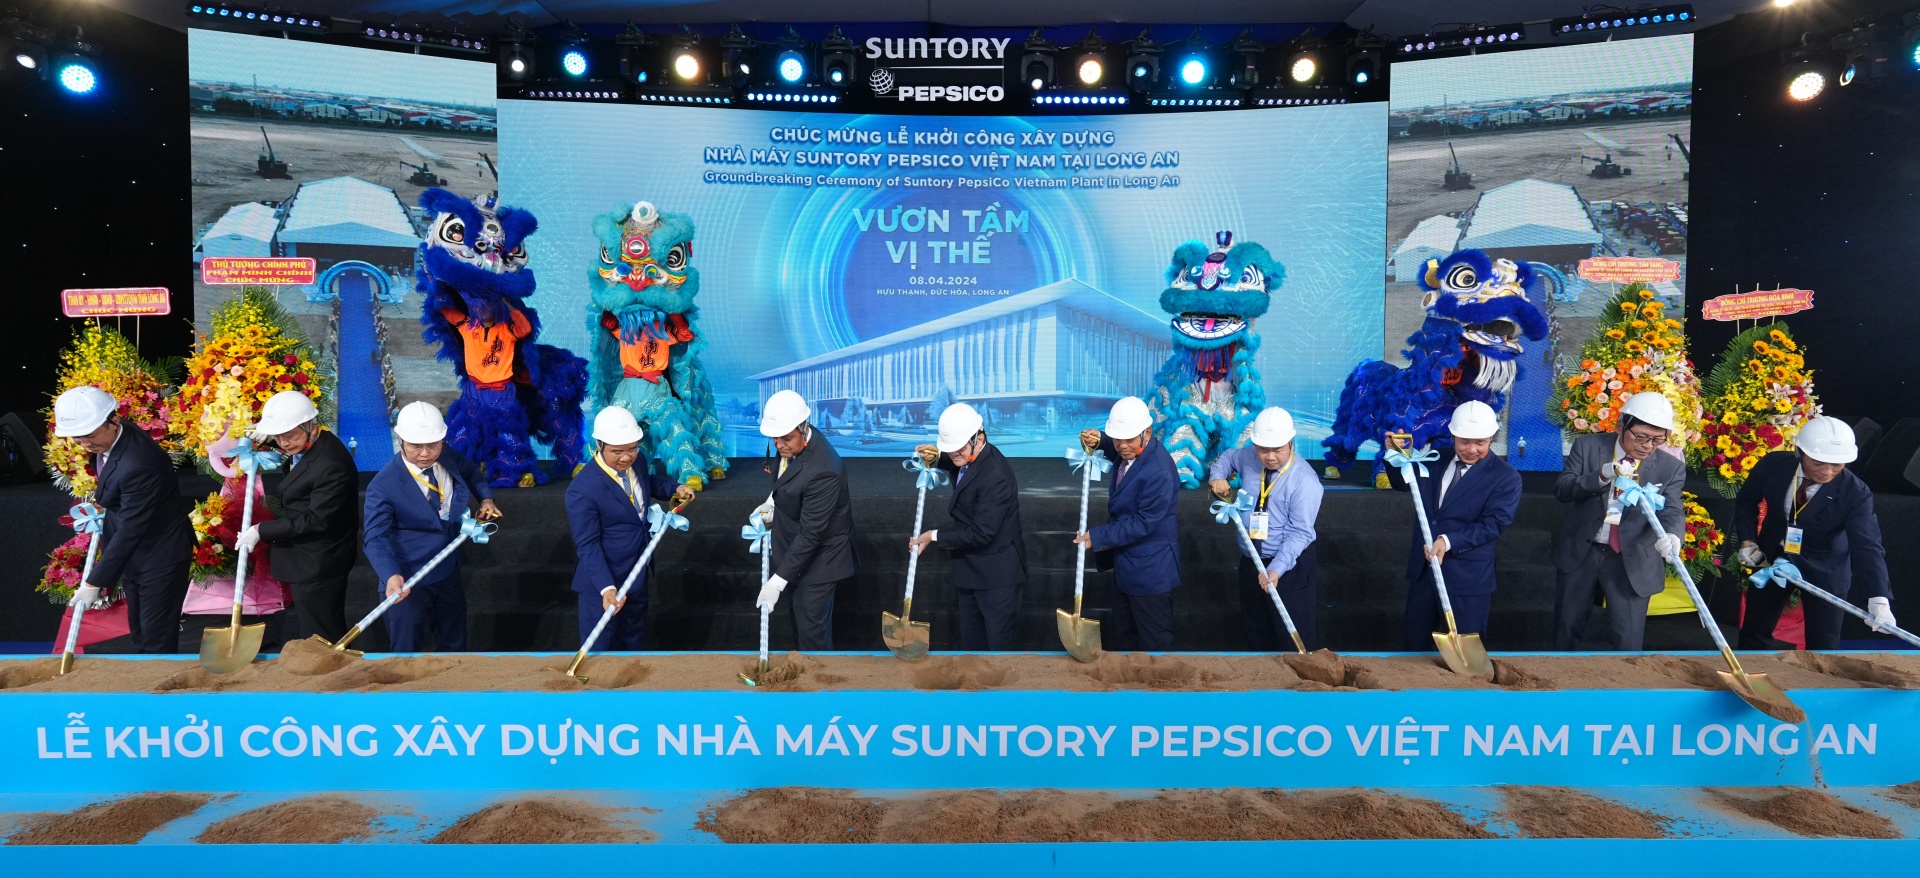 Suntory Pepsico begins construction of $300 million plant in Long An